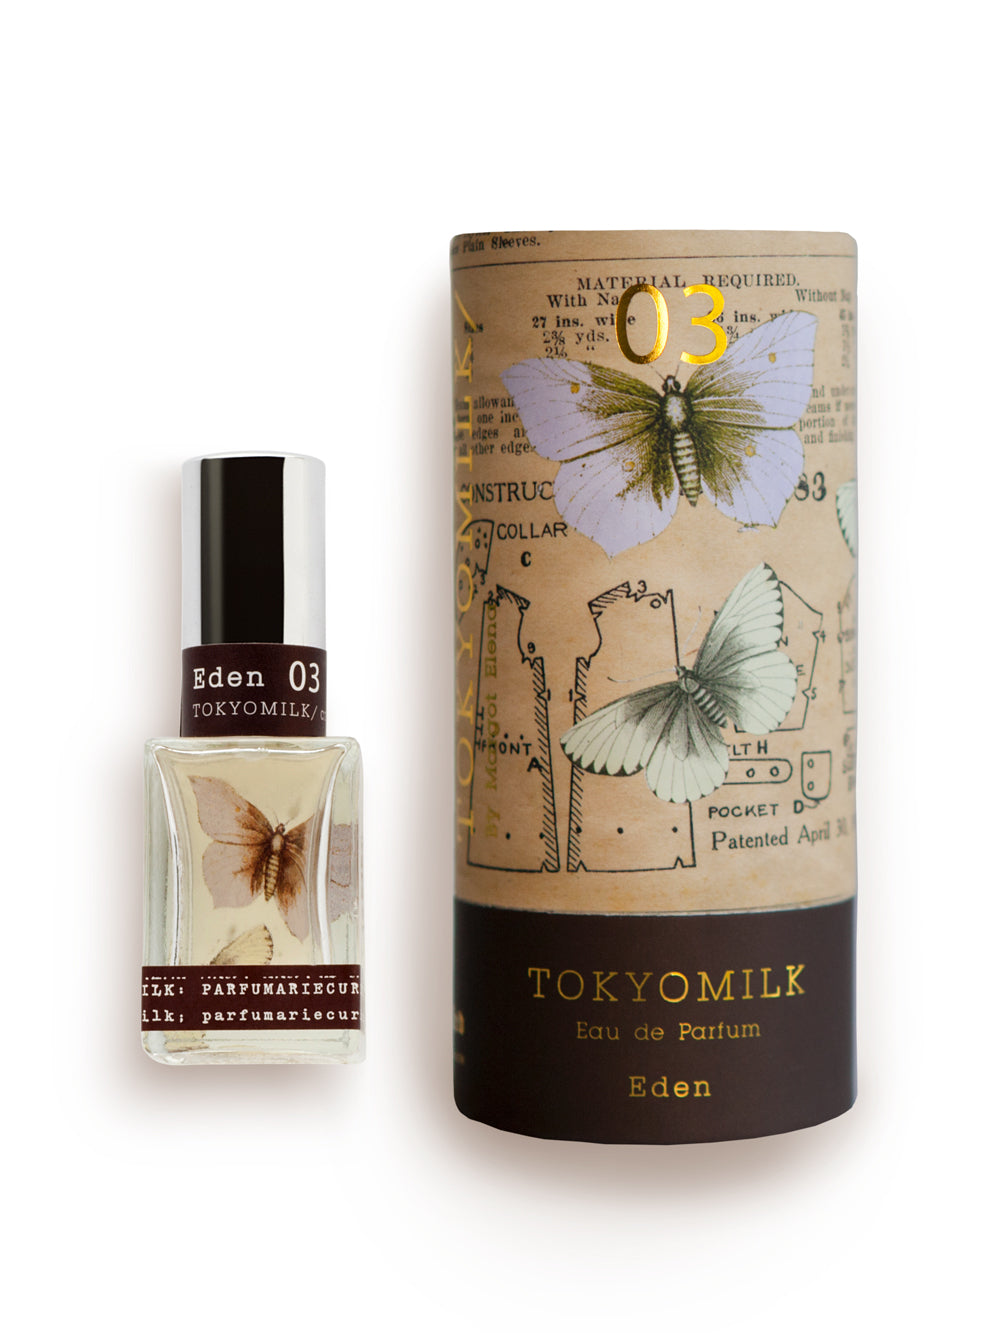 A bottle of Margot Elena's TokyoMilk Eden No. 3 Parfum next to its cylindrical packaging, which is adorned with vintage-inspired graphics featuring insects and old text. Its scent is characterized by notes of White Iris, bronzed